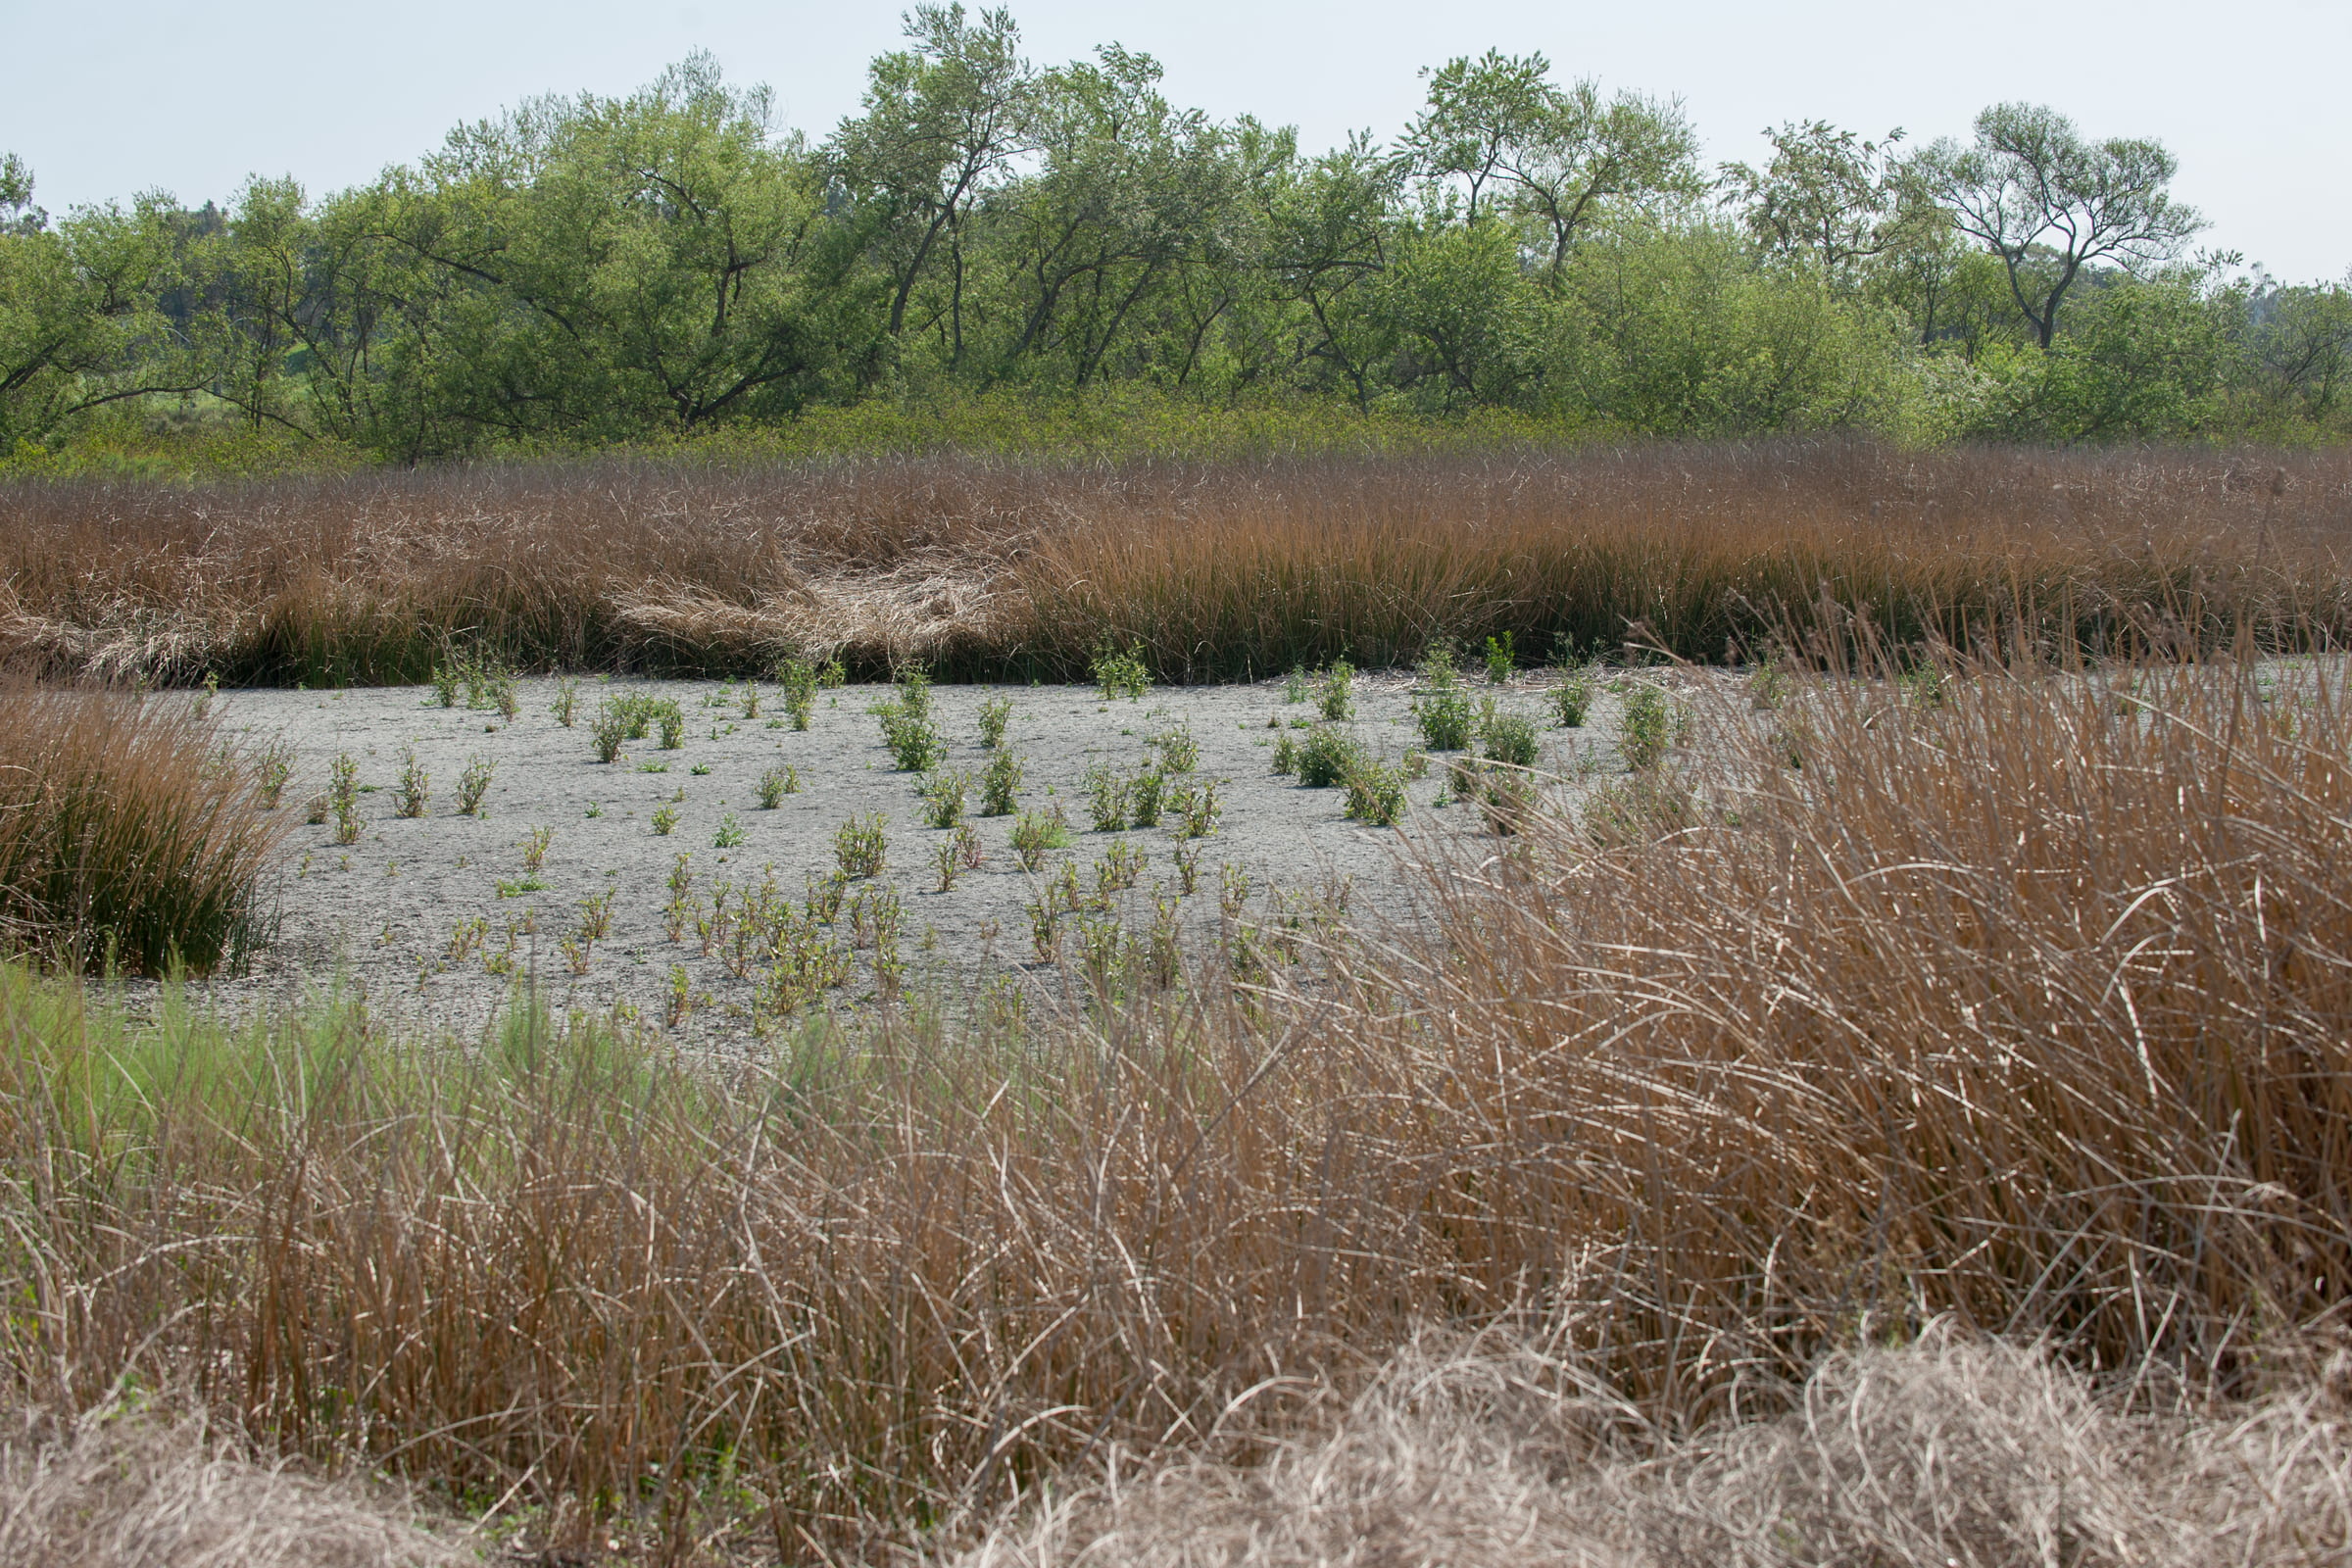 A dried-up pond at the San Joaquin Marsh Reserve near UC Irvine